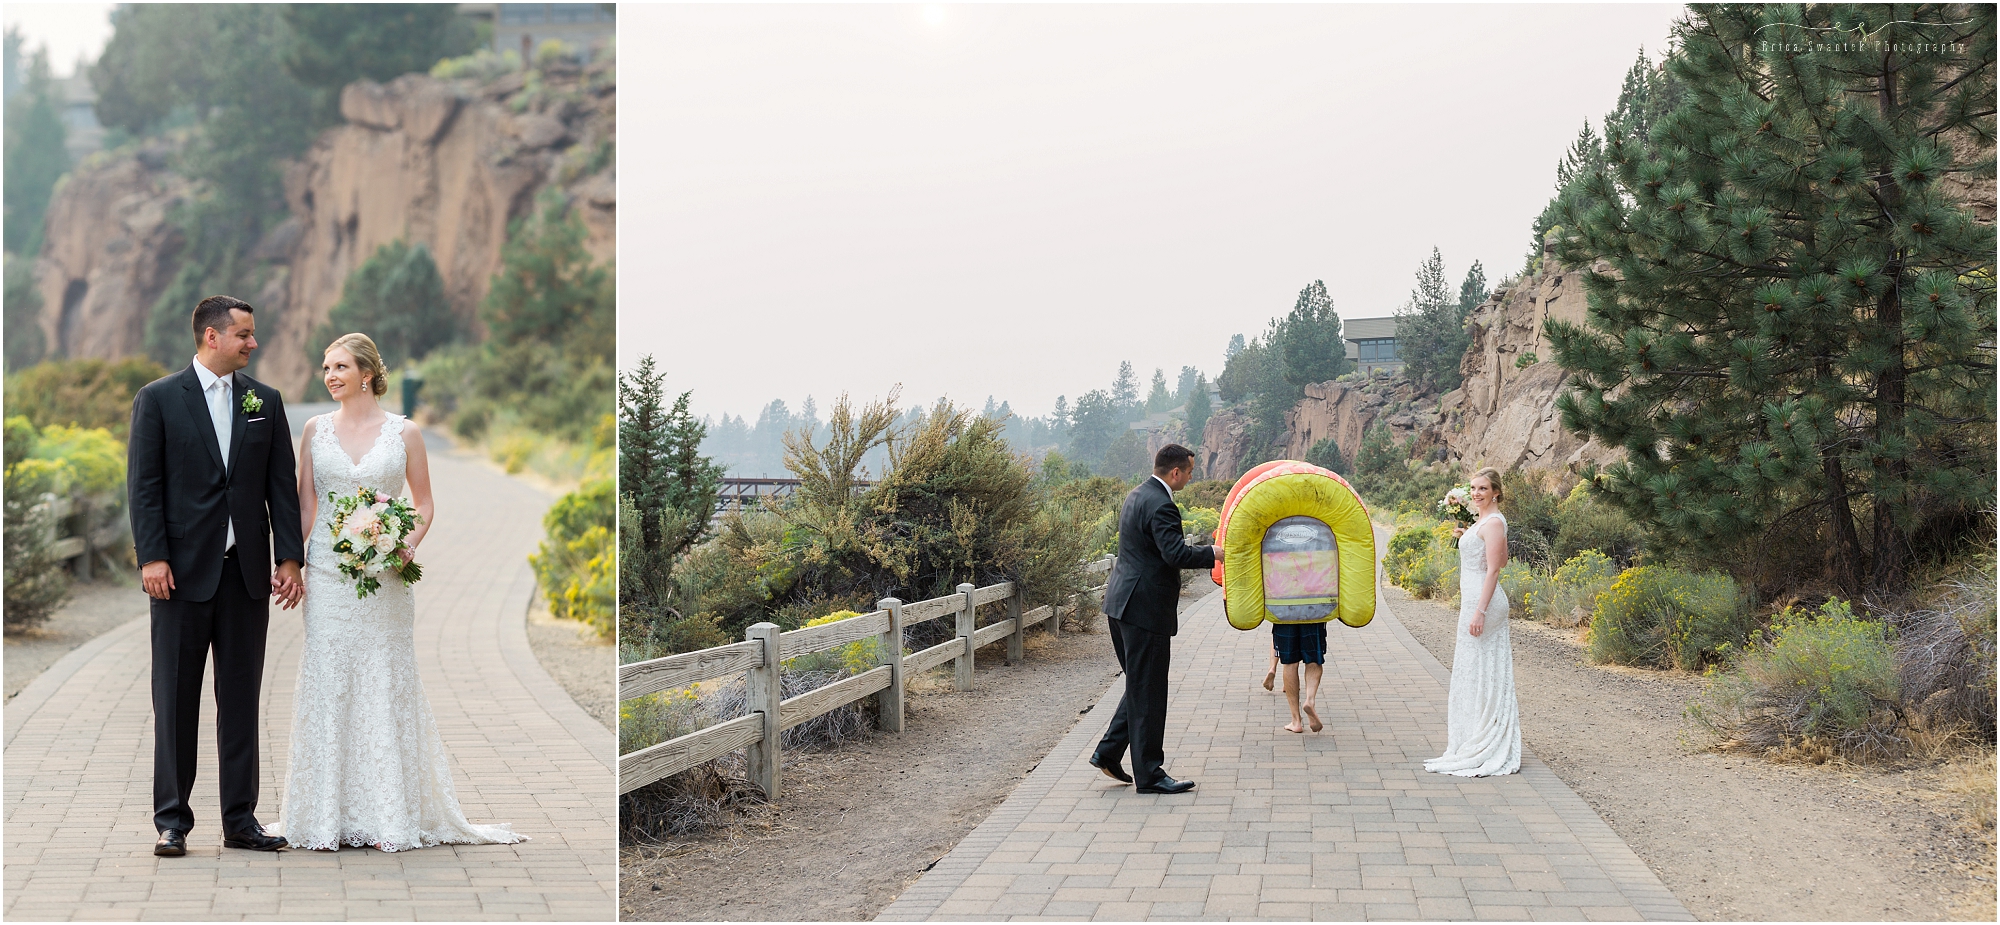 Deschutes Brewery Wedding romantic portraits along river trail in Bend. | Erica Swantek Photography